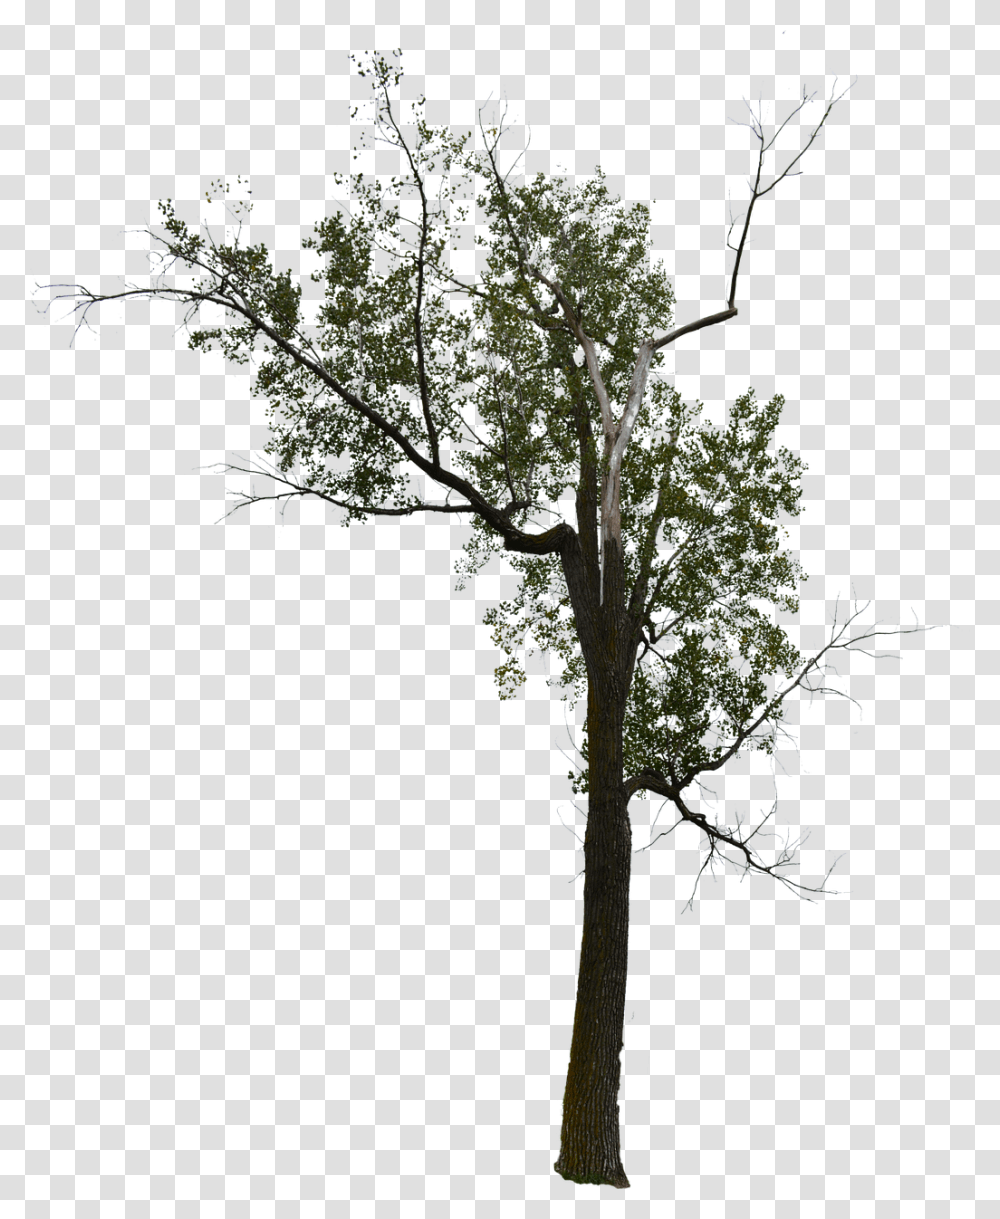 Dead Tree Dead Tree With No Background Halloween Tree, Plant, Cross, Conifer Transparent Png